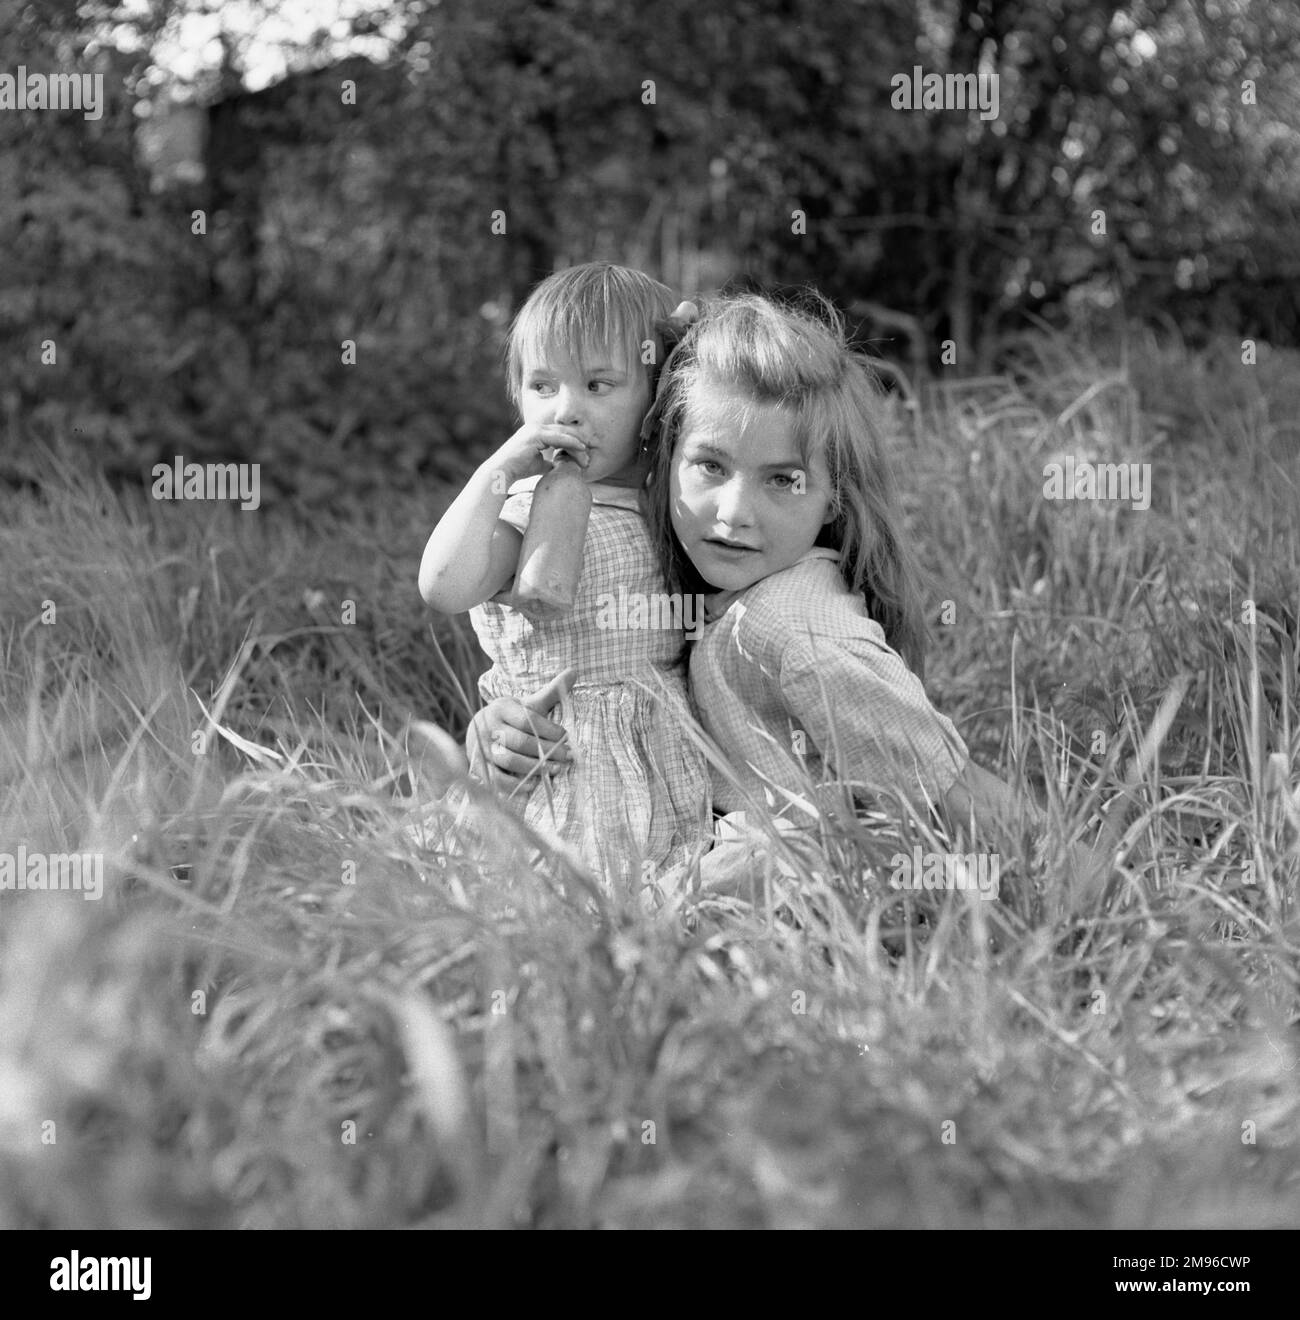 Two gipsy girls sitting in the long grass in a field.  The younger girl is holding a feeding bottle to her mouth. Stock Photo